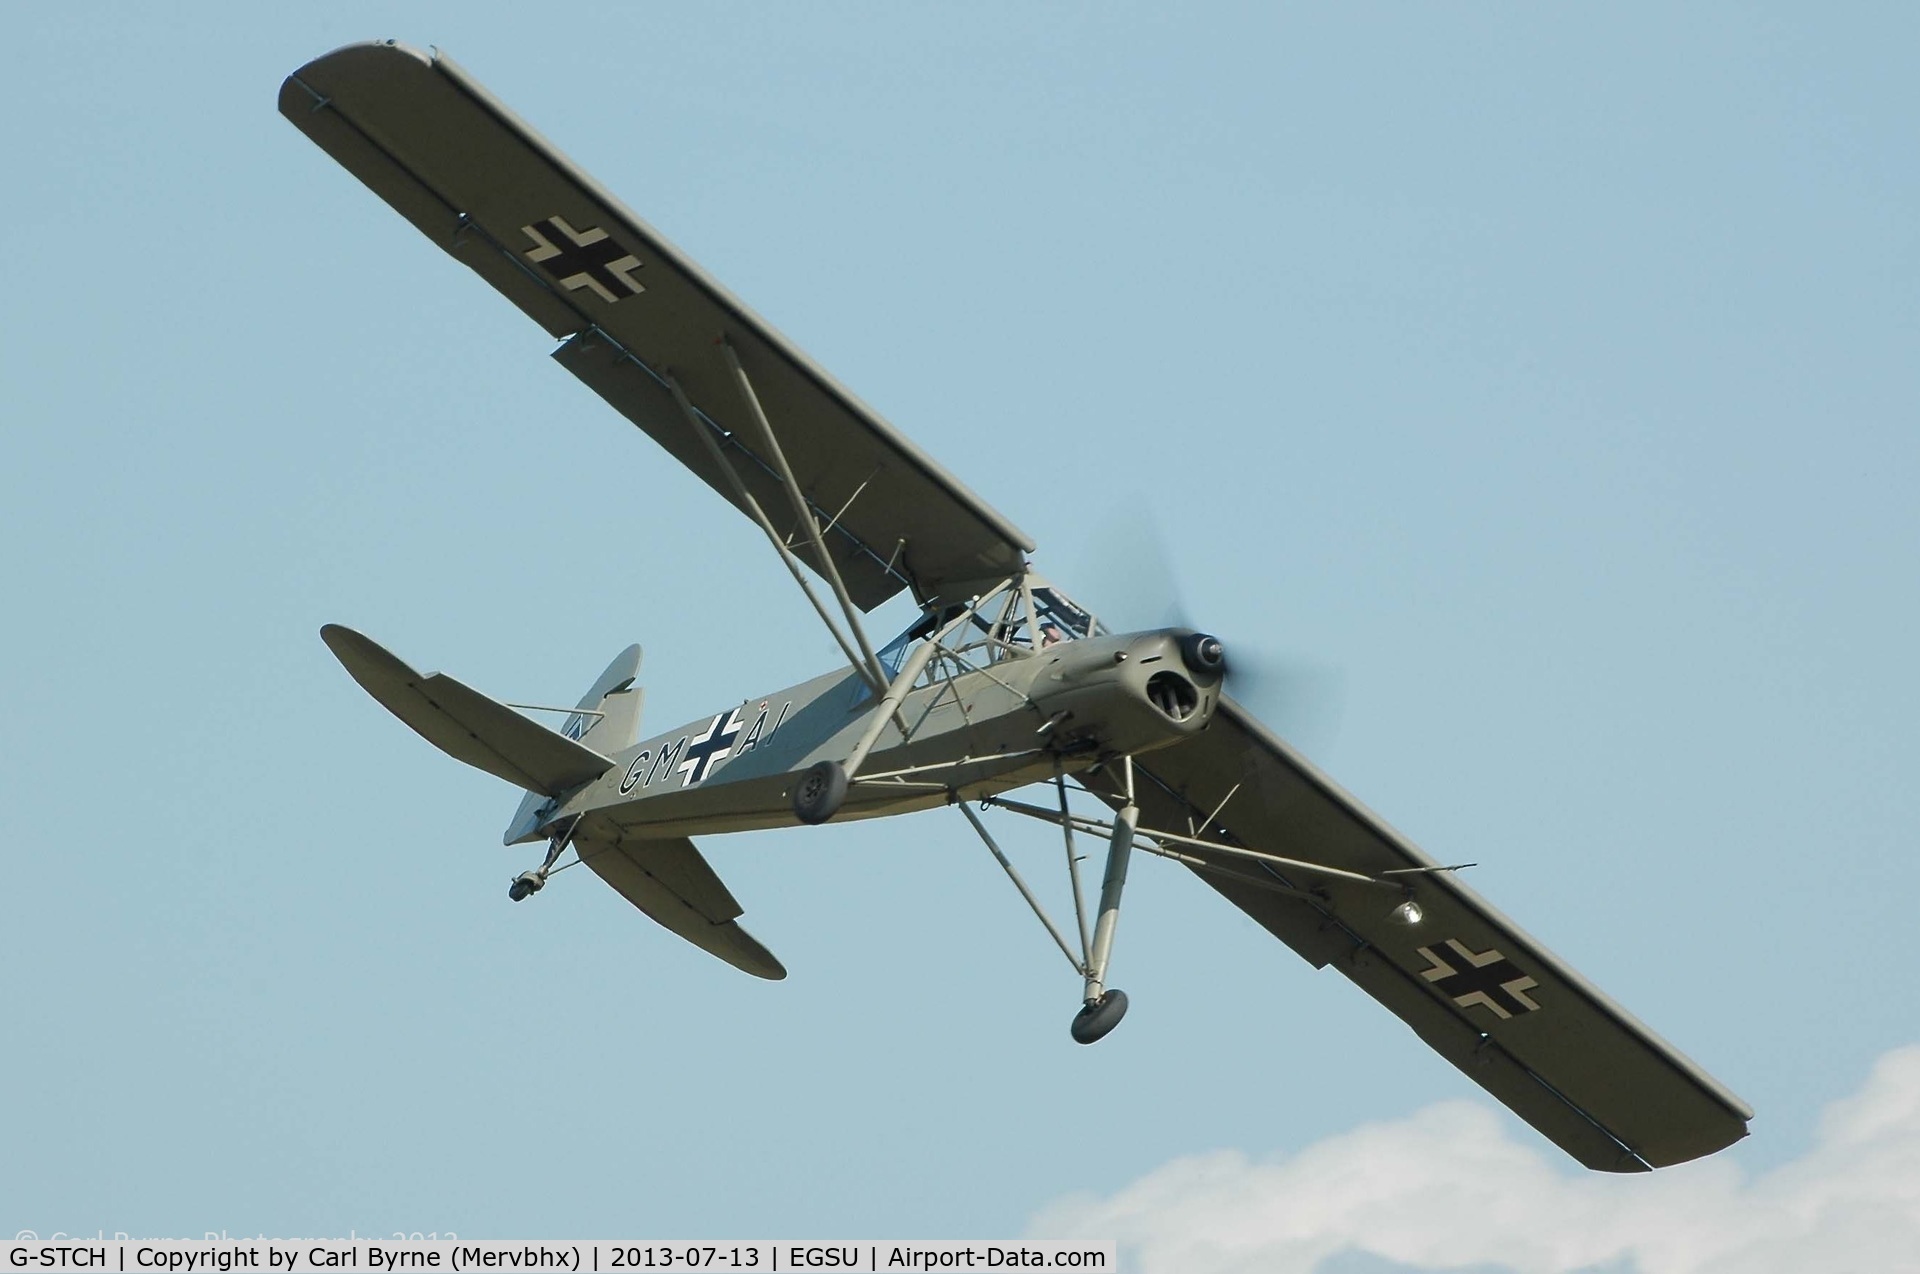 G-STCH, 1942 Fieseler Fi-156A-1 Storch C/N 2088, Flying as part of the 